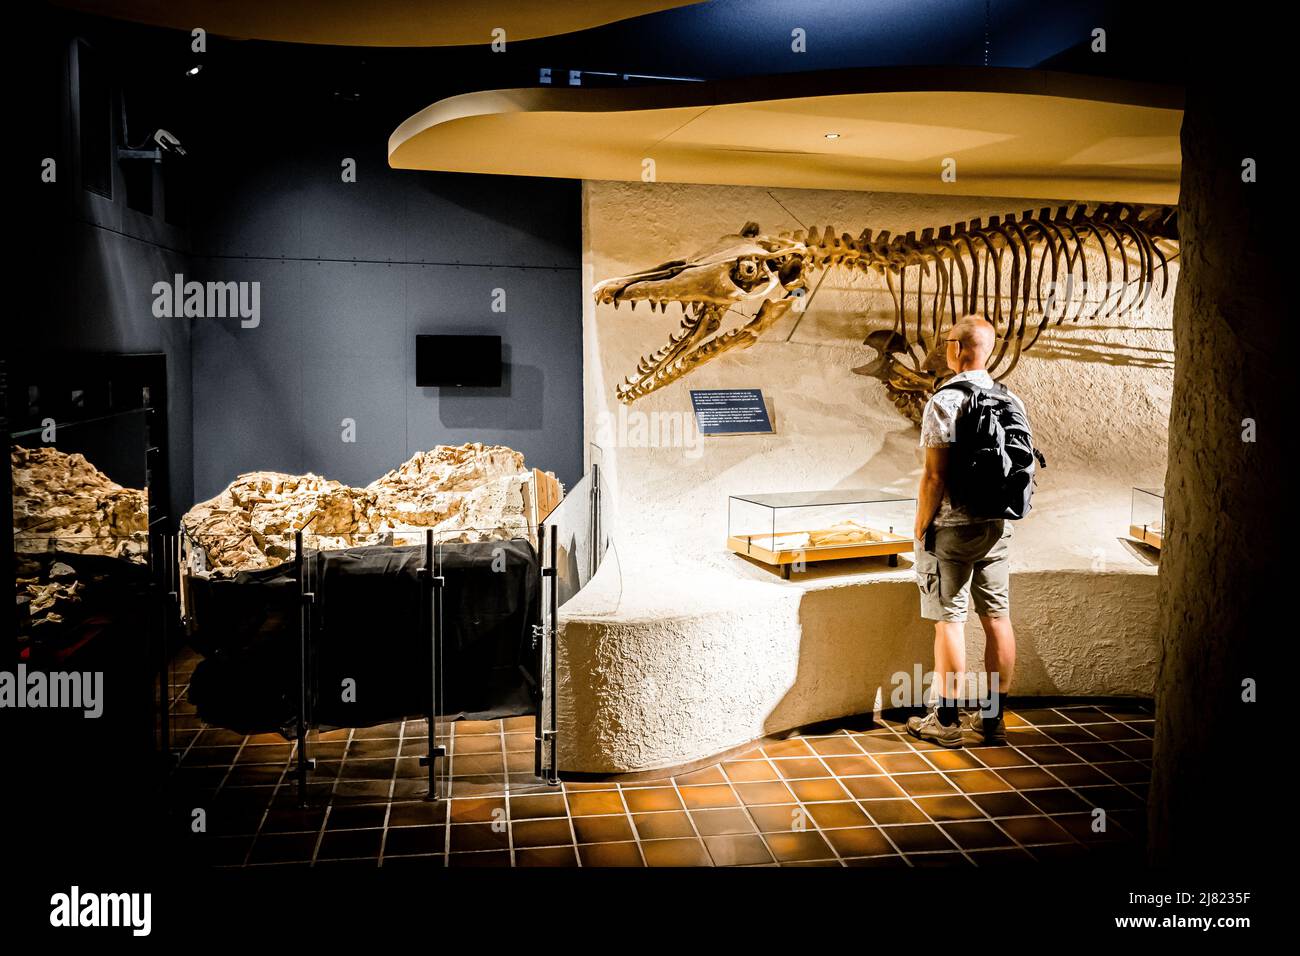 View of a man standing in front of a mounted Mosasaurus fossil at the Natural History Museum in Maastricht, the Netherlands Stock Photo